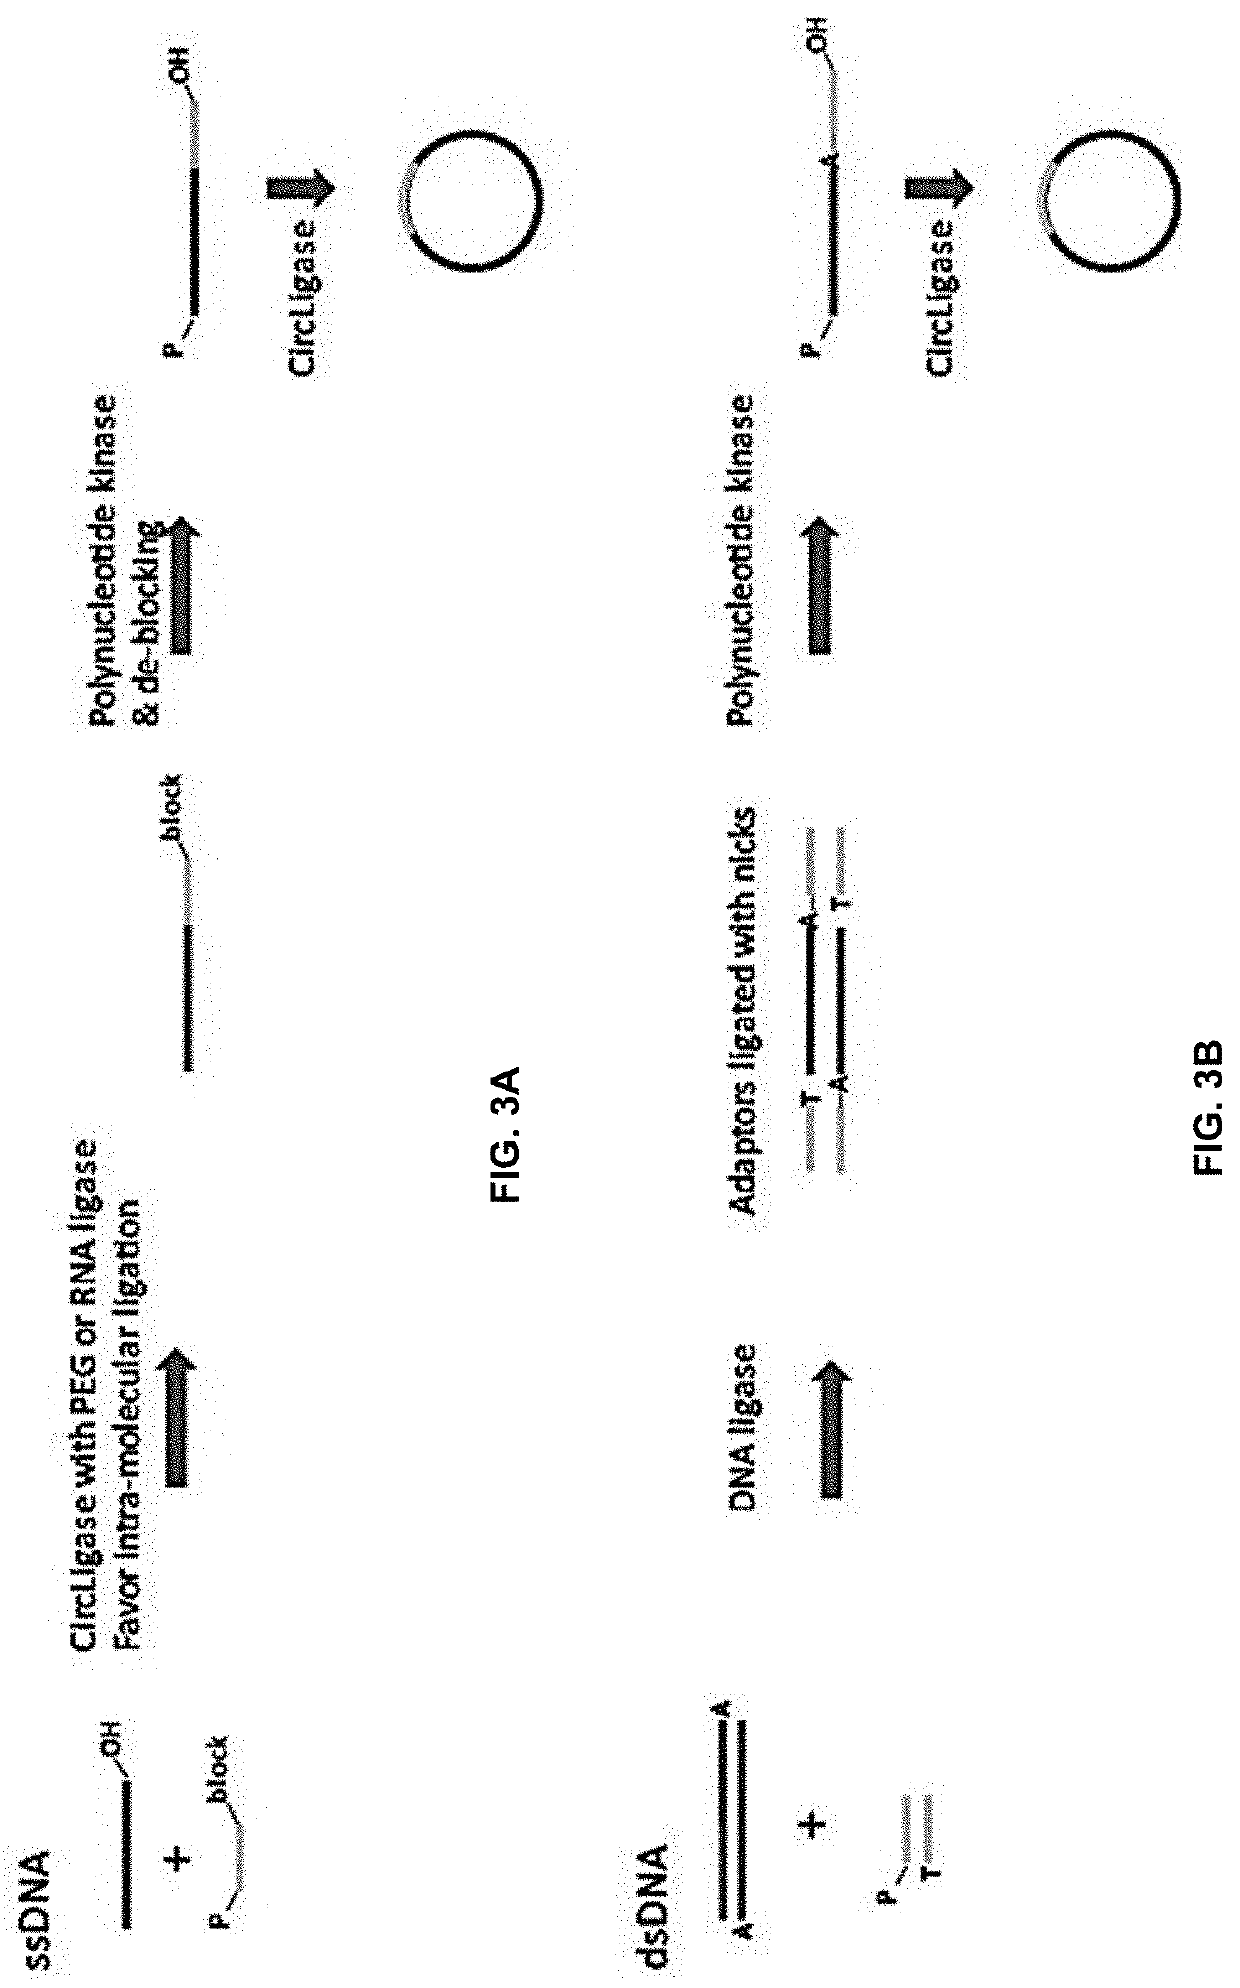 Compositions and methods for digital polymerase chain reaction